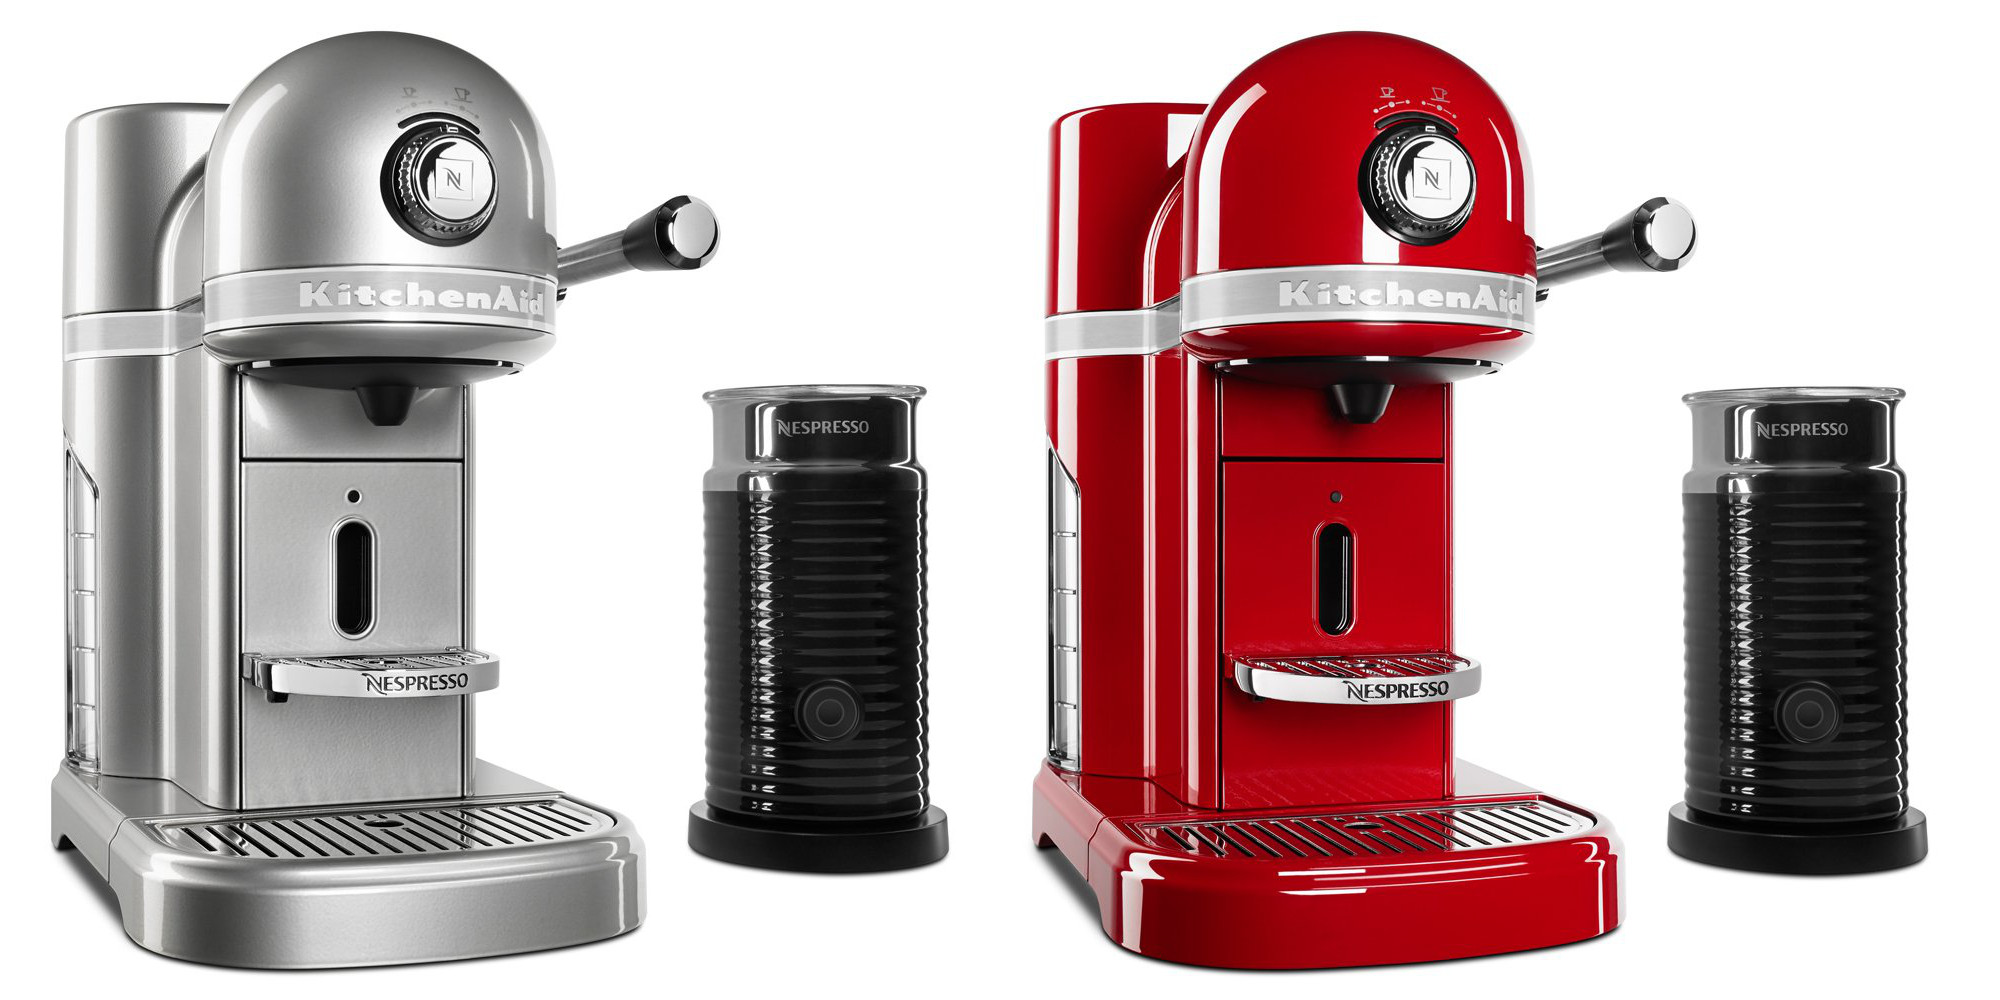 KitchenAid's Nespresso Espresso Maker w/ Milk Frother is more than $130  off: $200 shipped